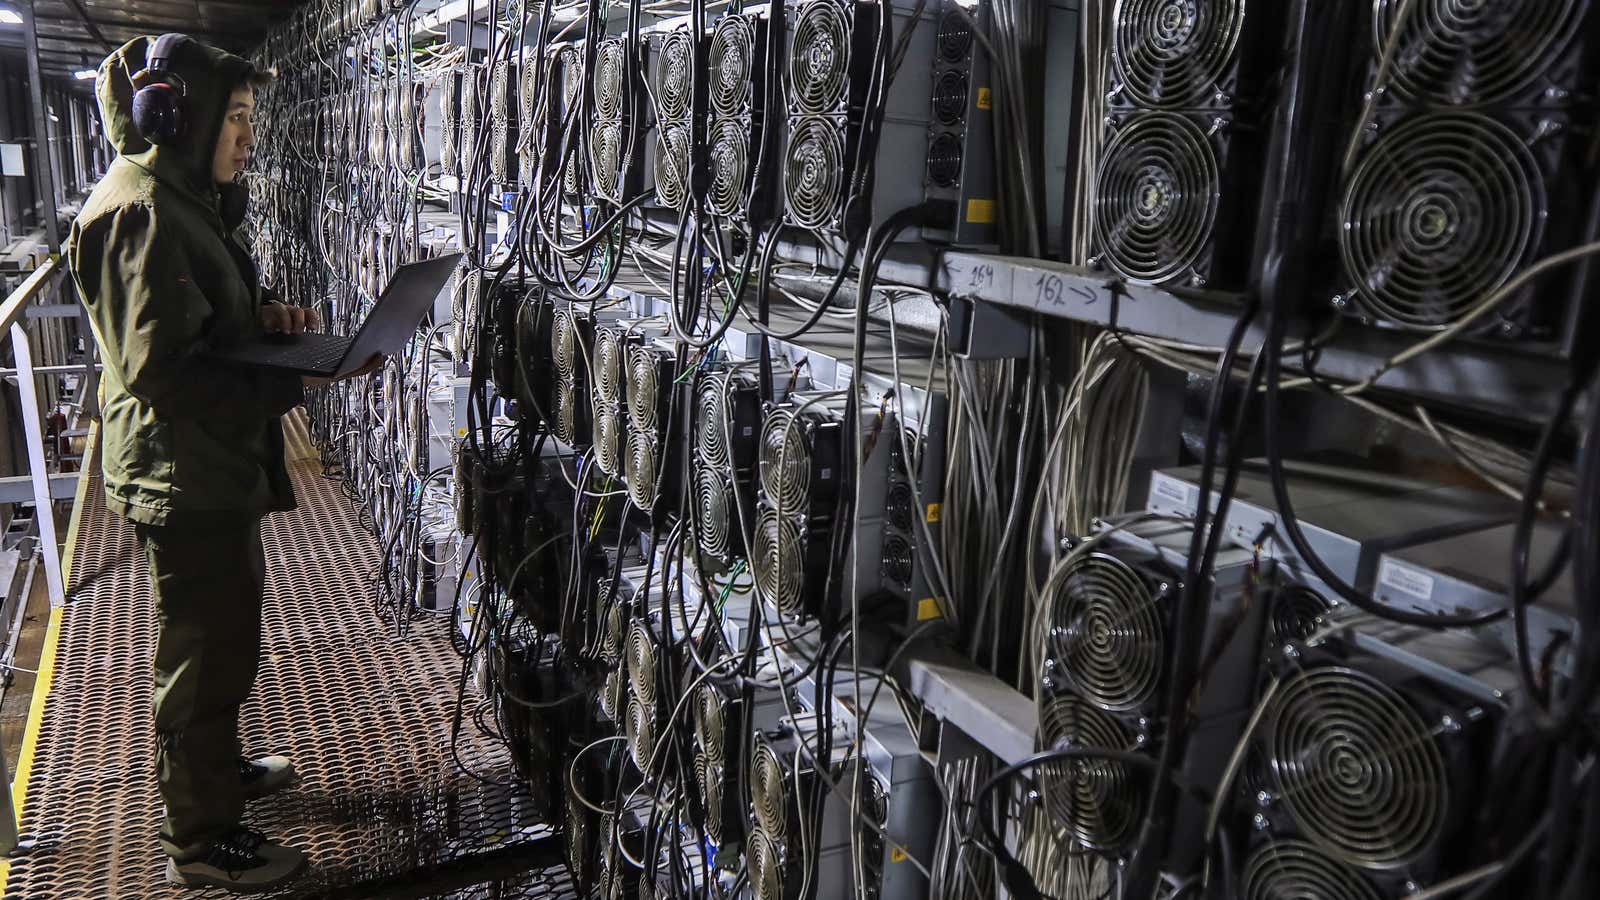 Bitcoin mining centers in Kazakhstan are shutting down as the price of bitcoin crashes.